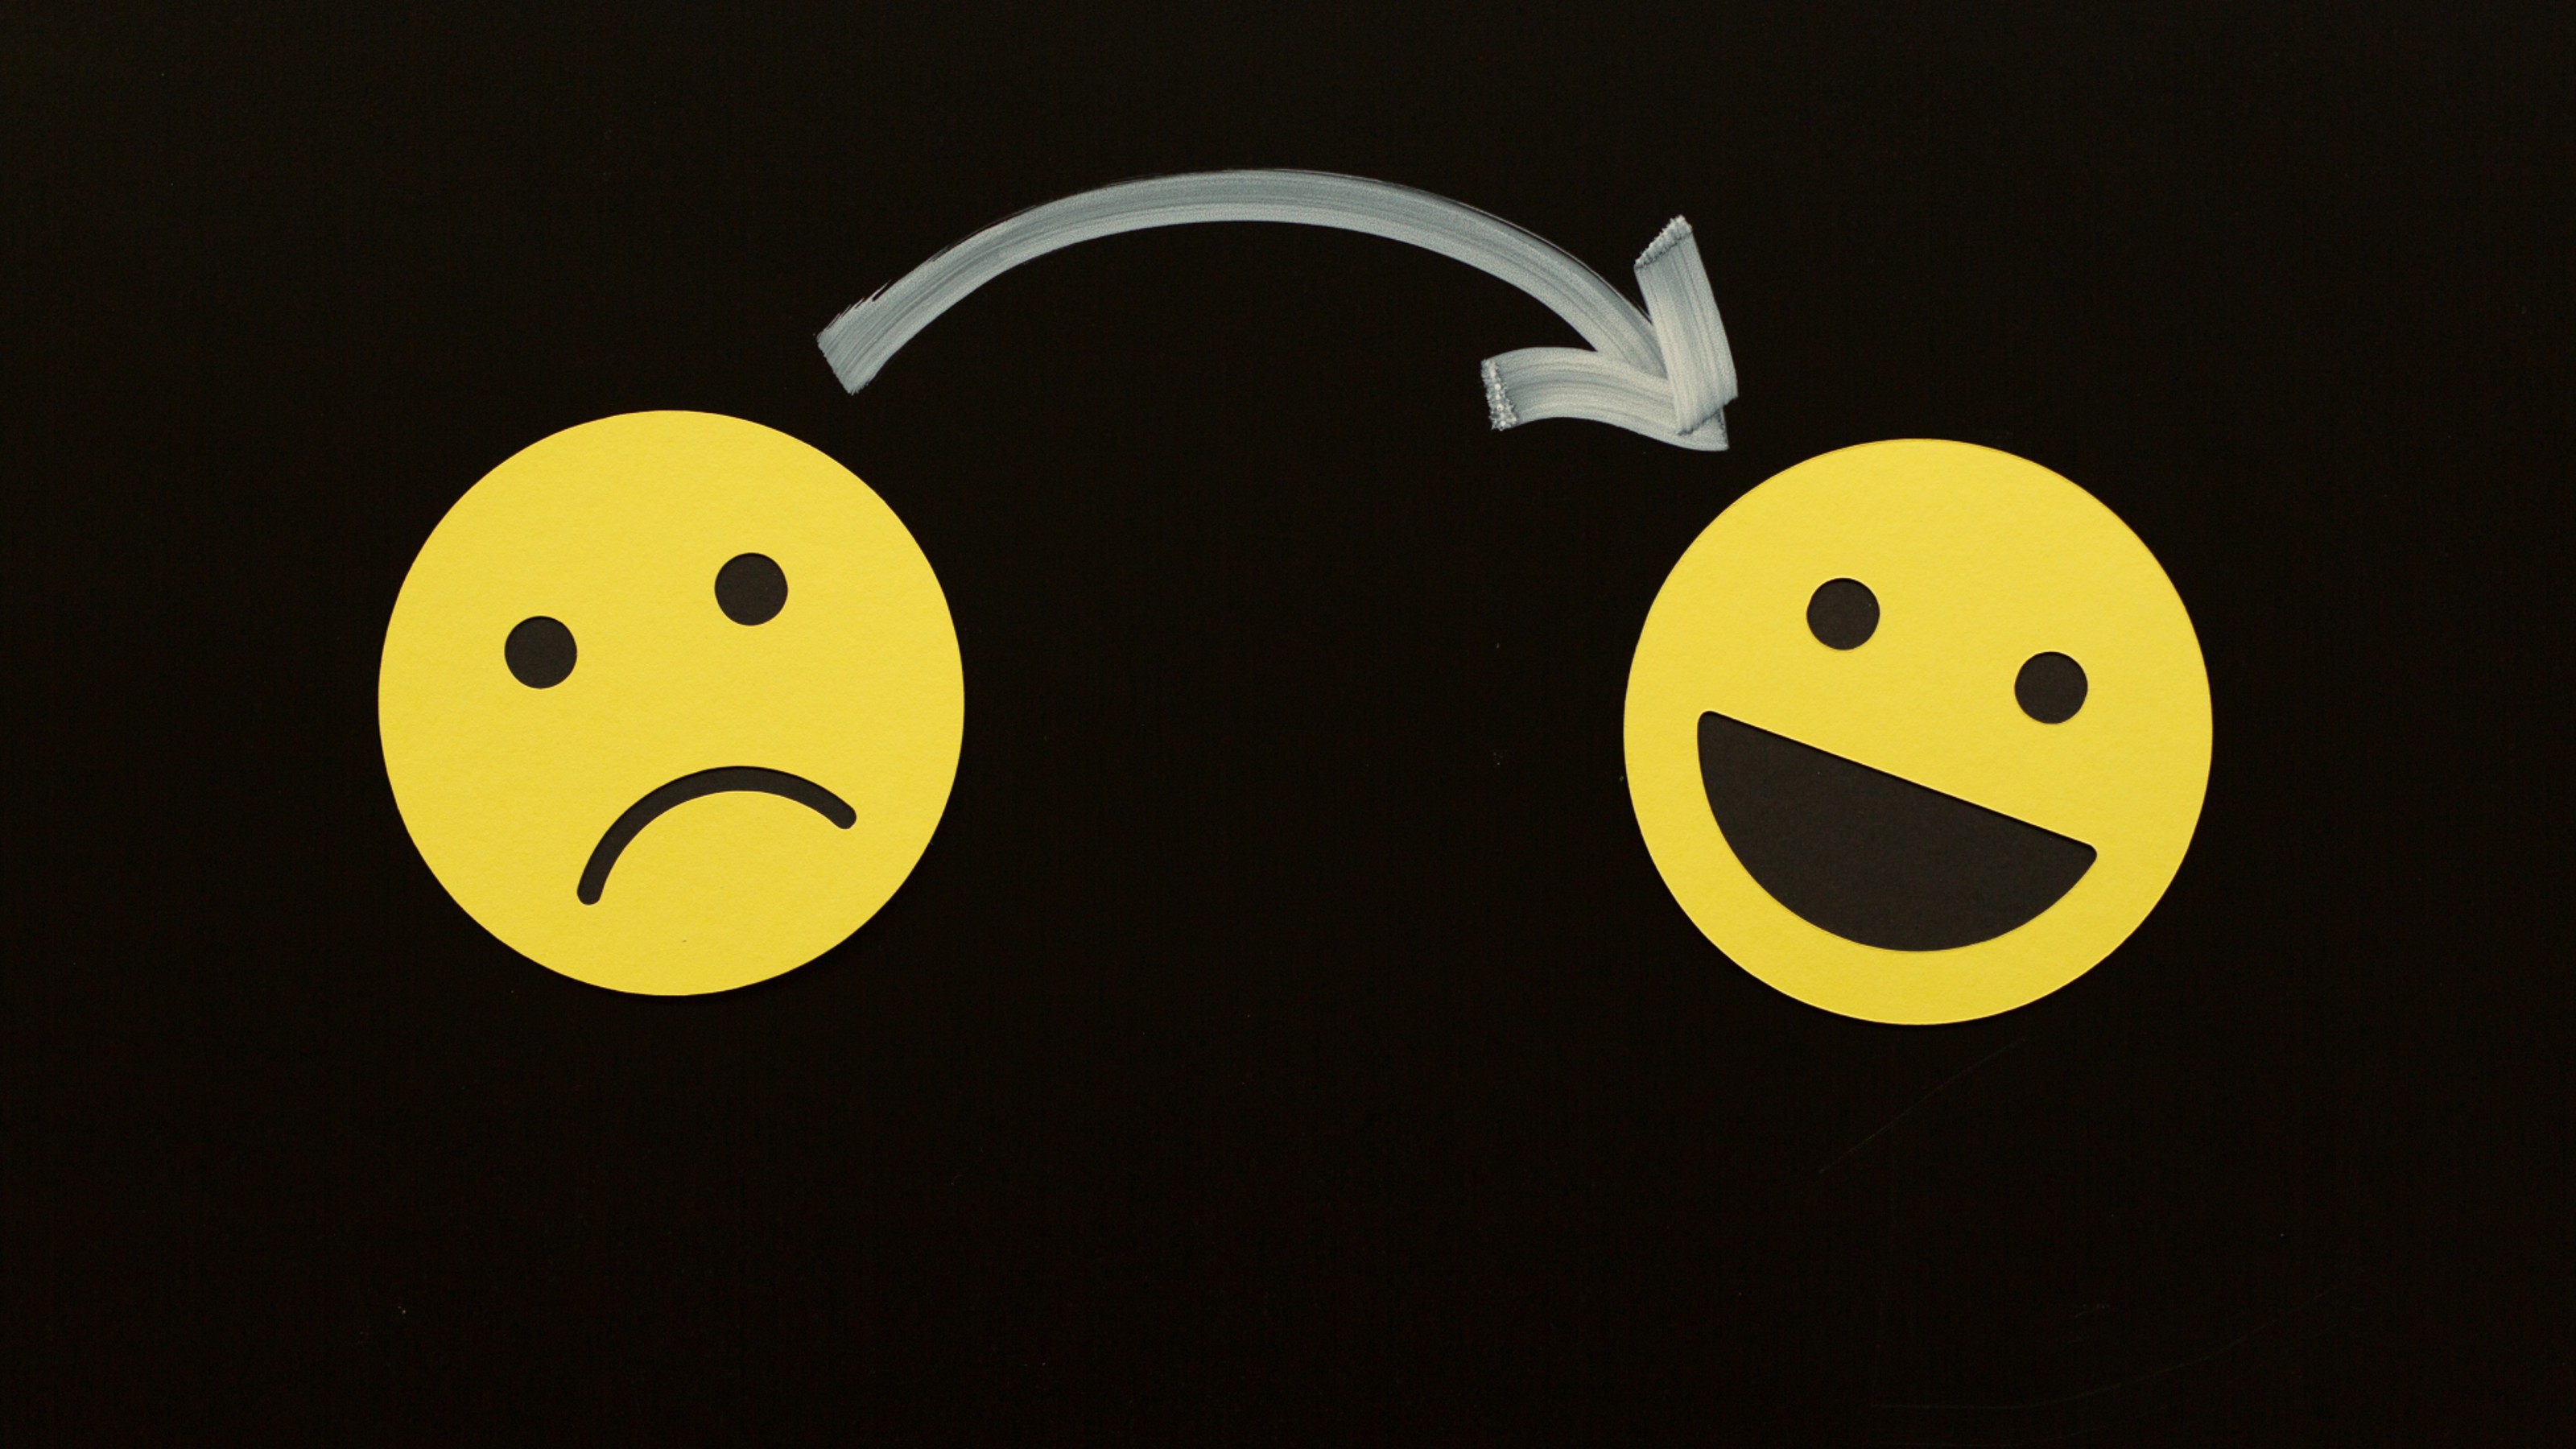 An arrow points from a sad yellow emoji face on the left to a happy yellow emoji face on the right against a black background.